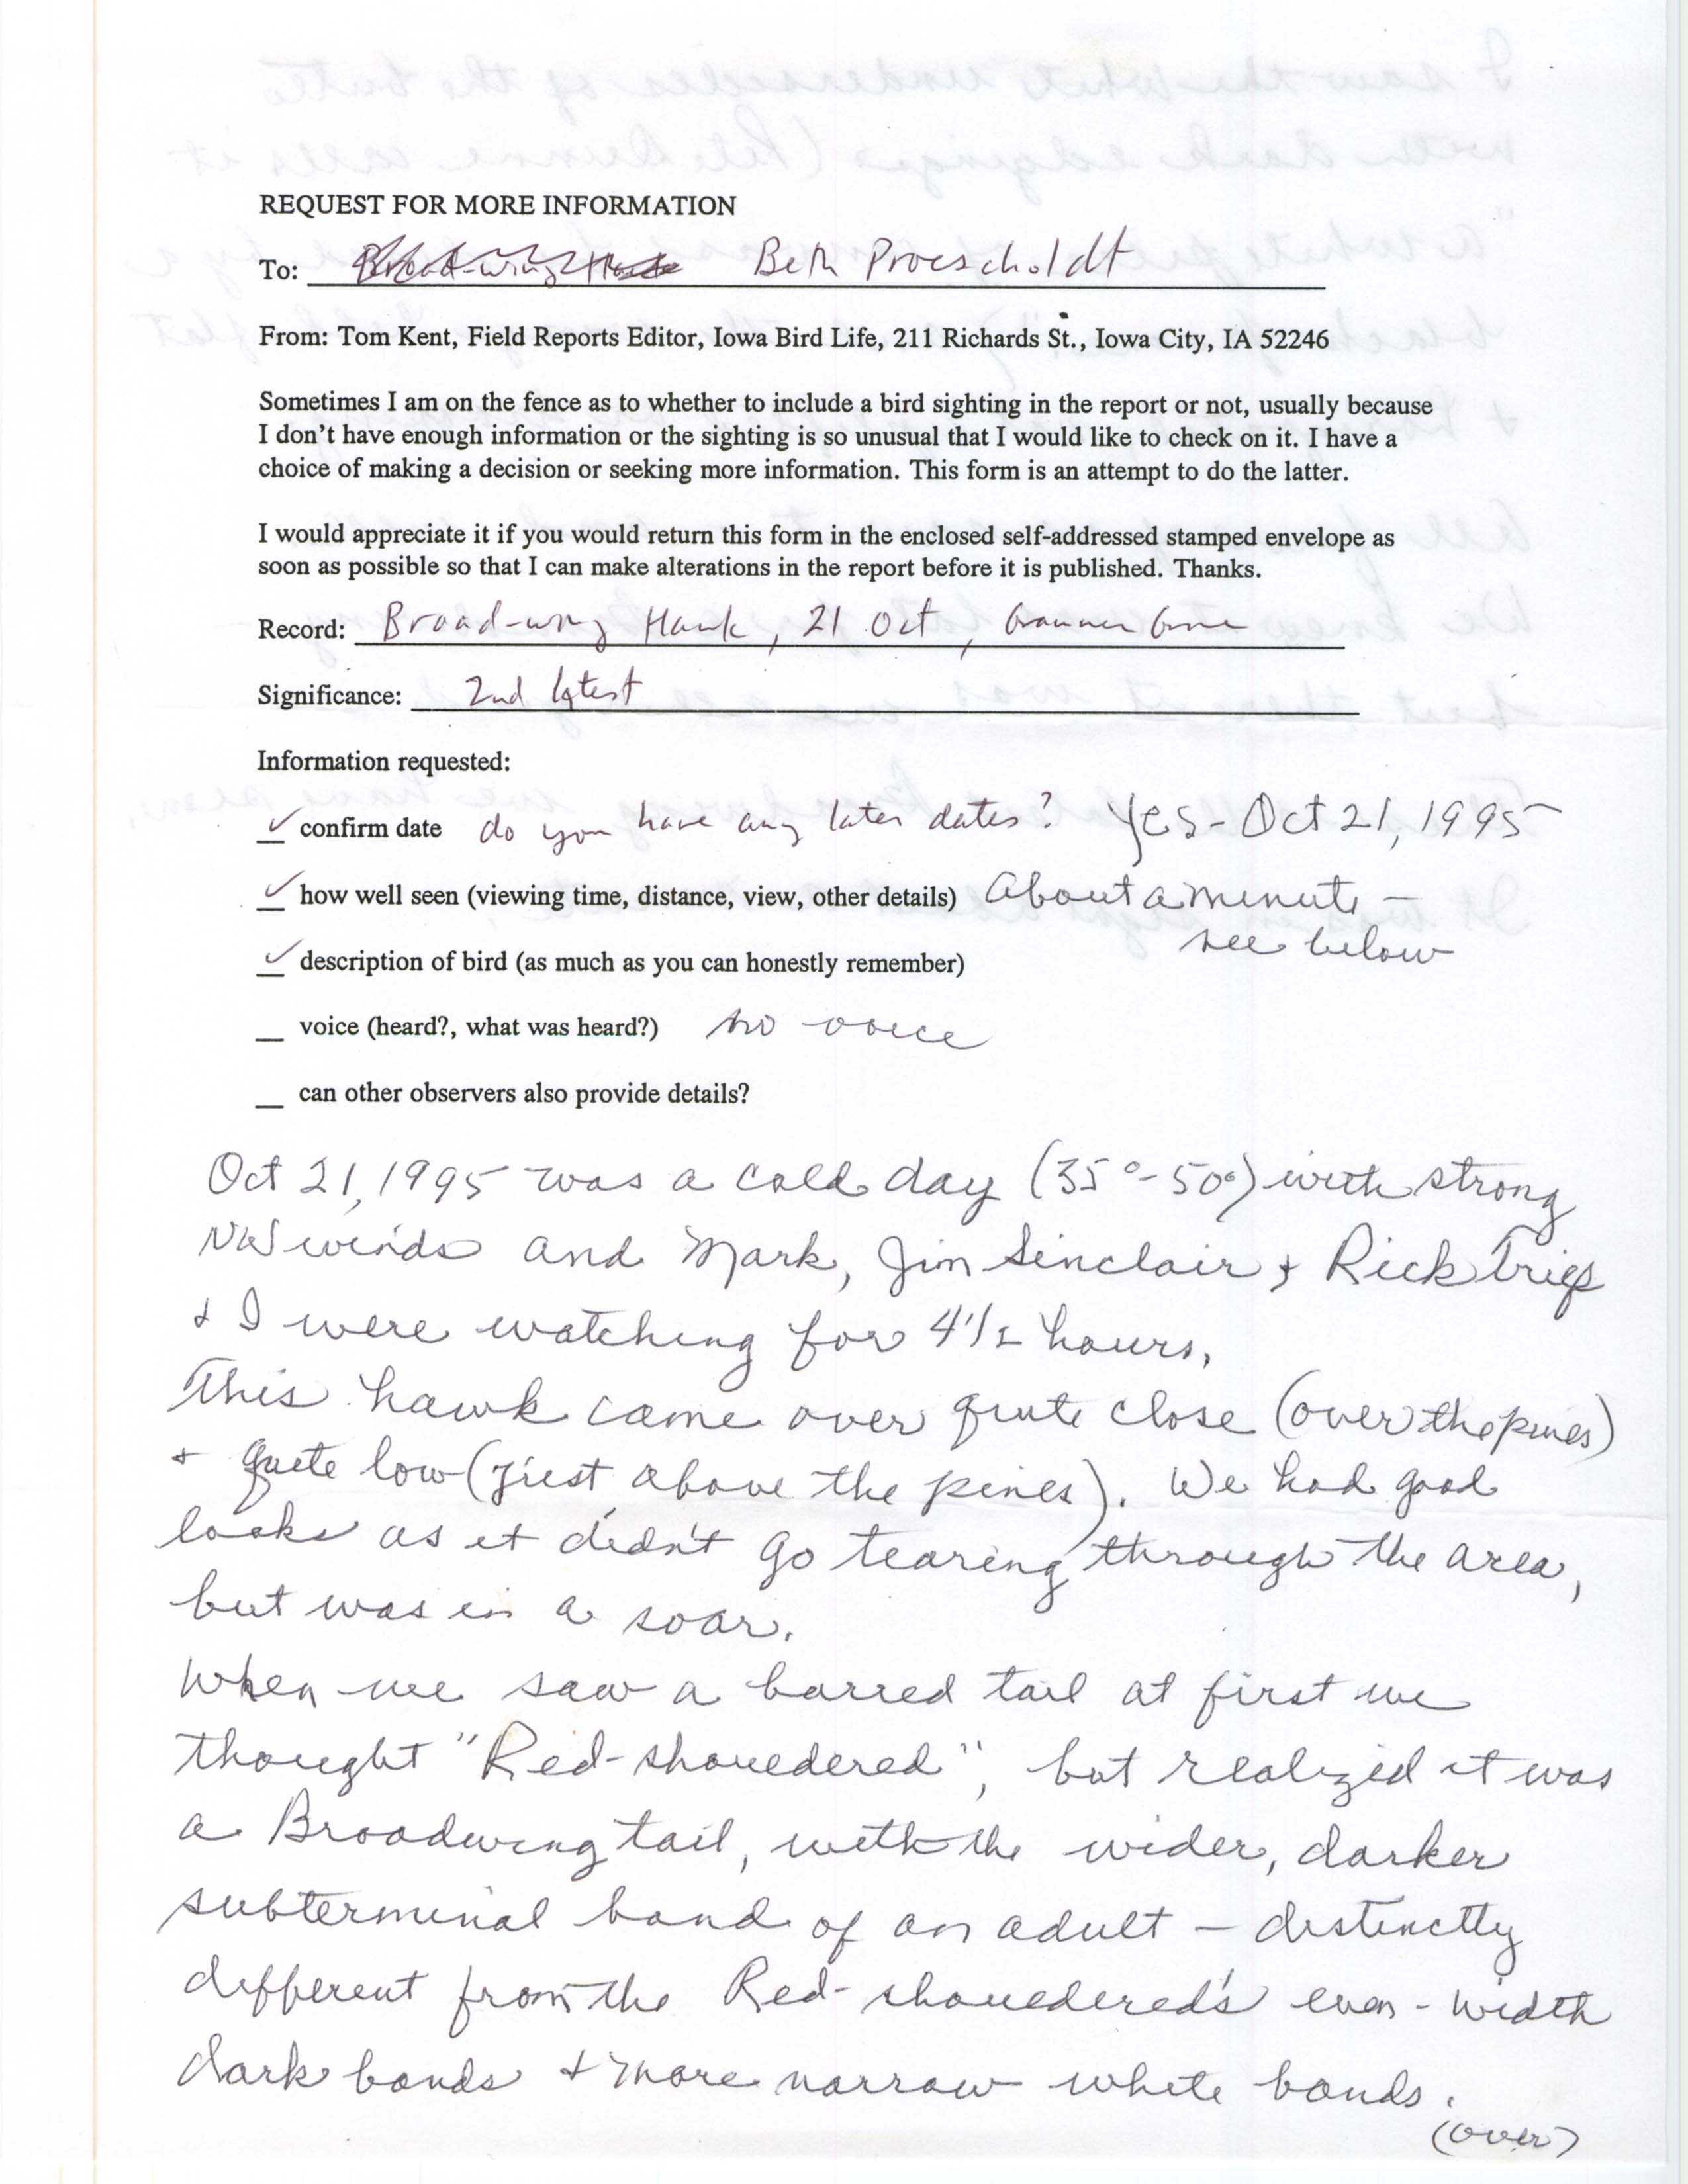 Rare bird documentation form for Broad-winged Hawk at Grammer Grove, 1995